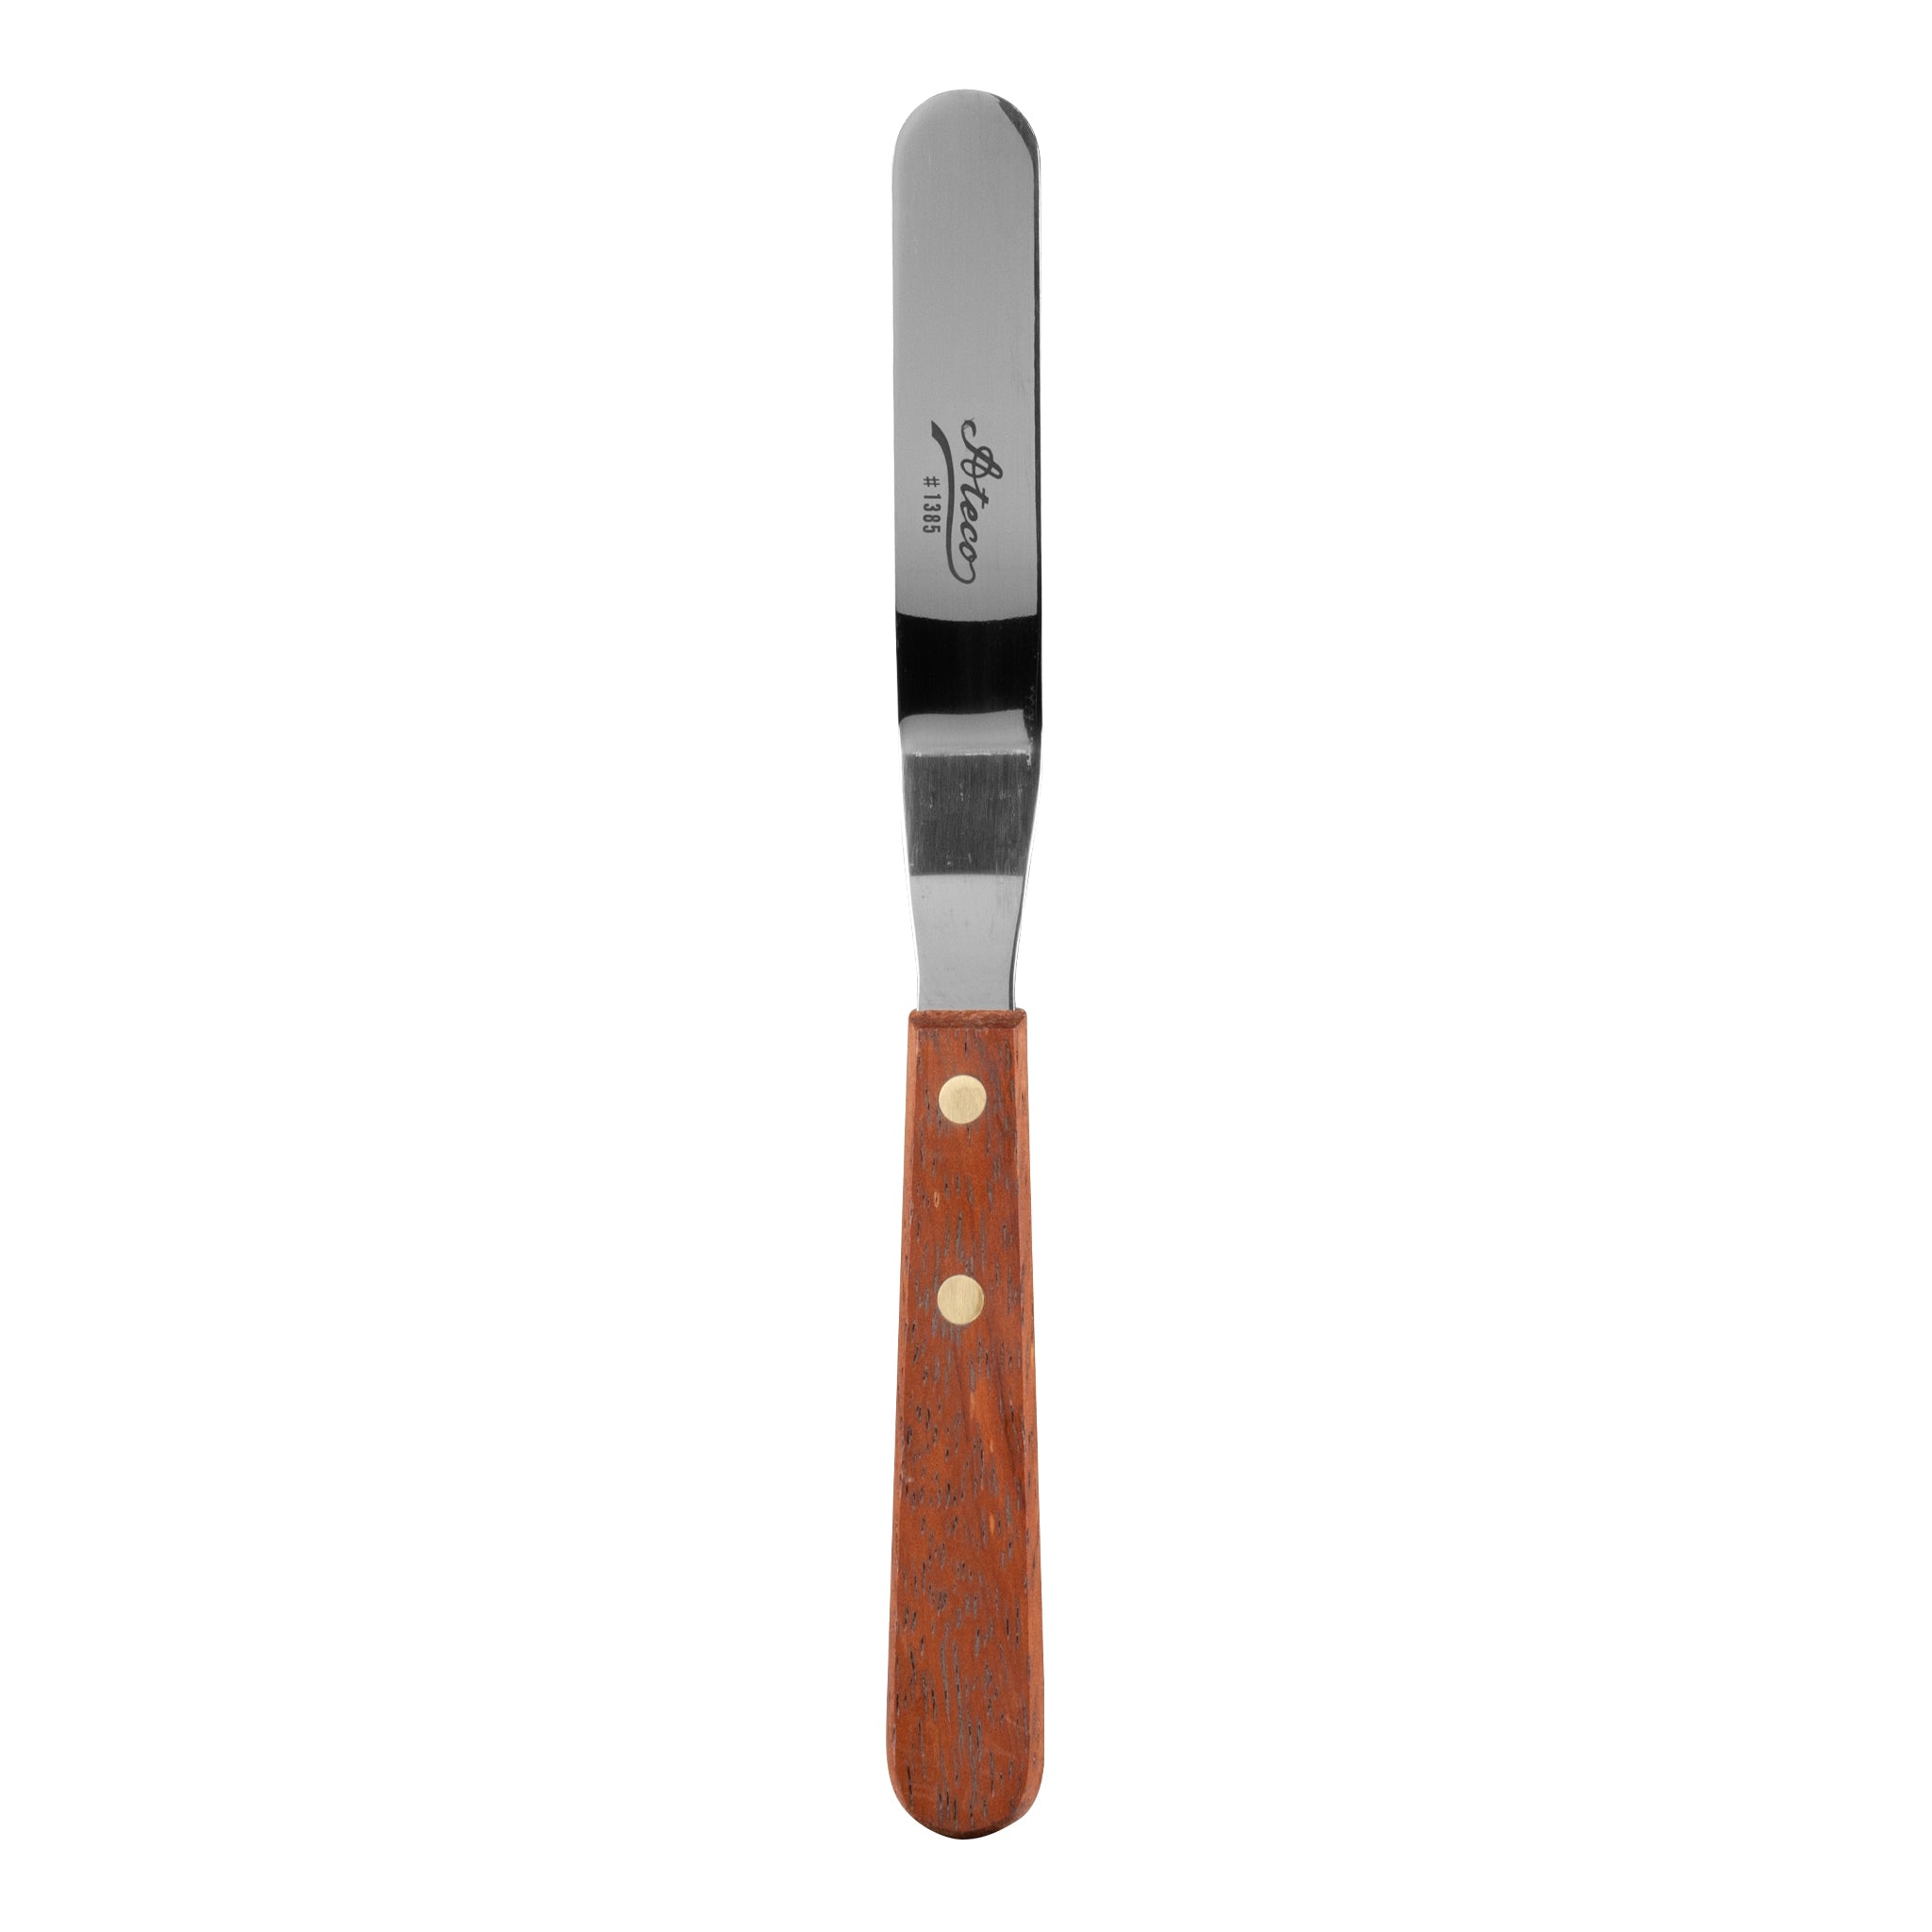 Ateco 1383 5 Blade Tapered Offset Baking / Icing Spatula with Wood Handle